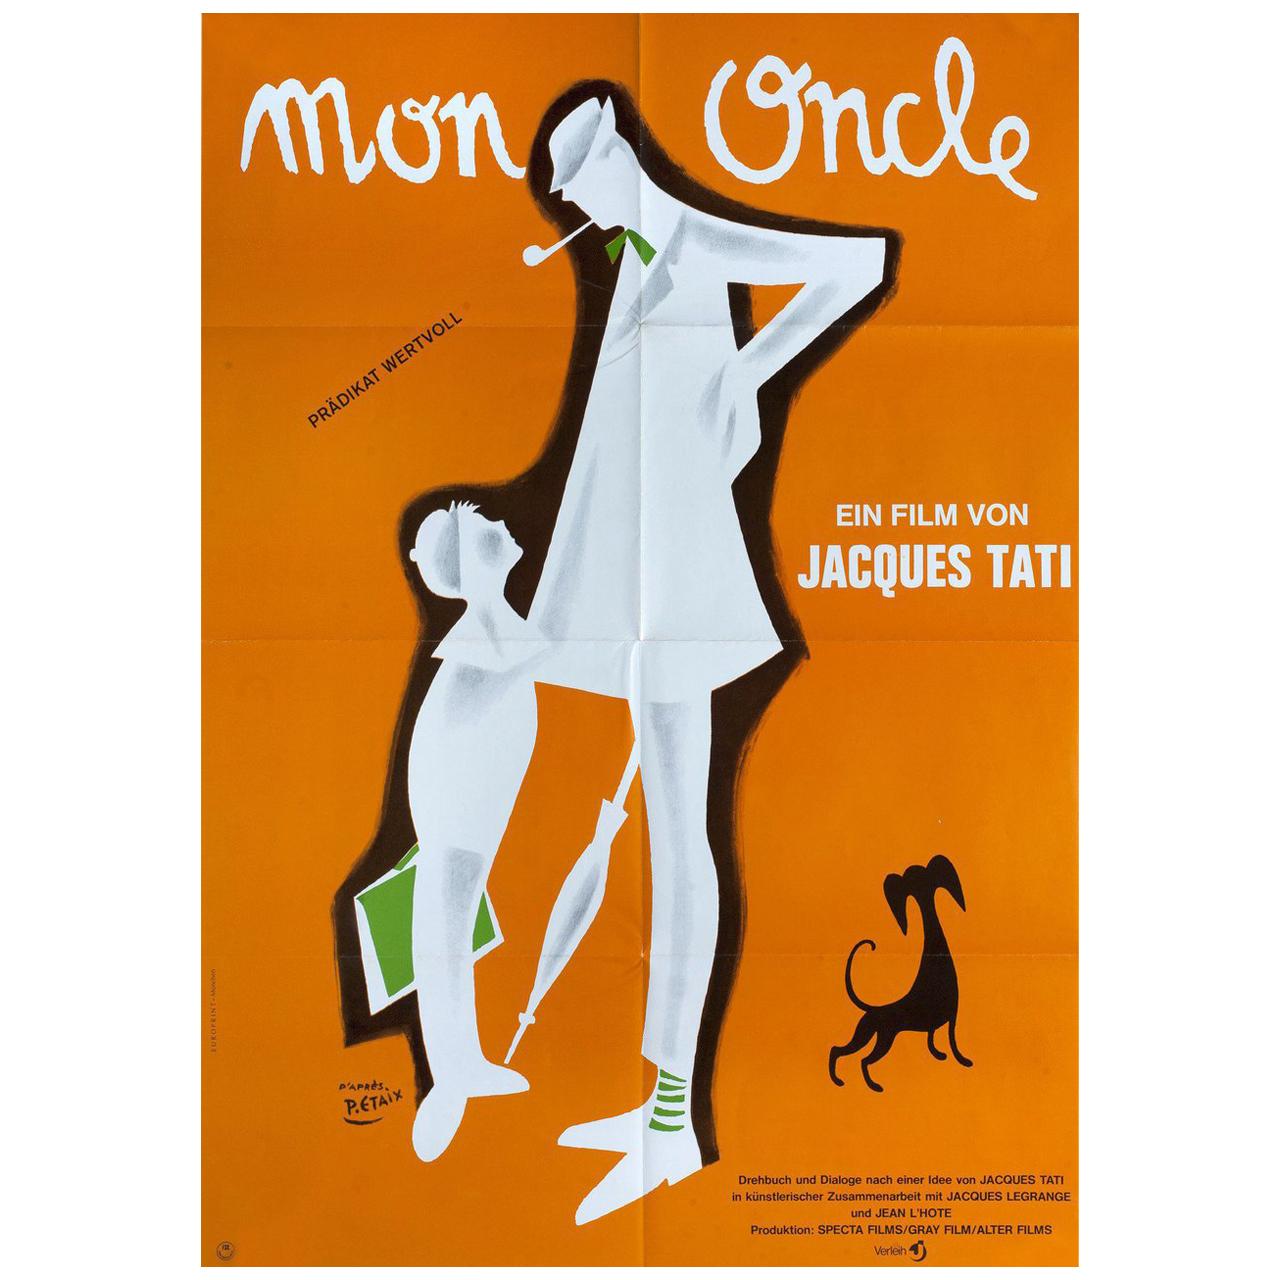 Mon Oncle R1970s German A1 Film Poster